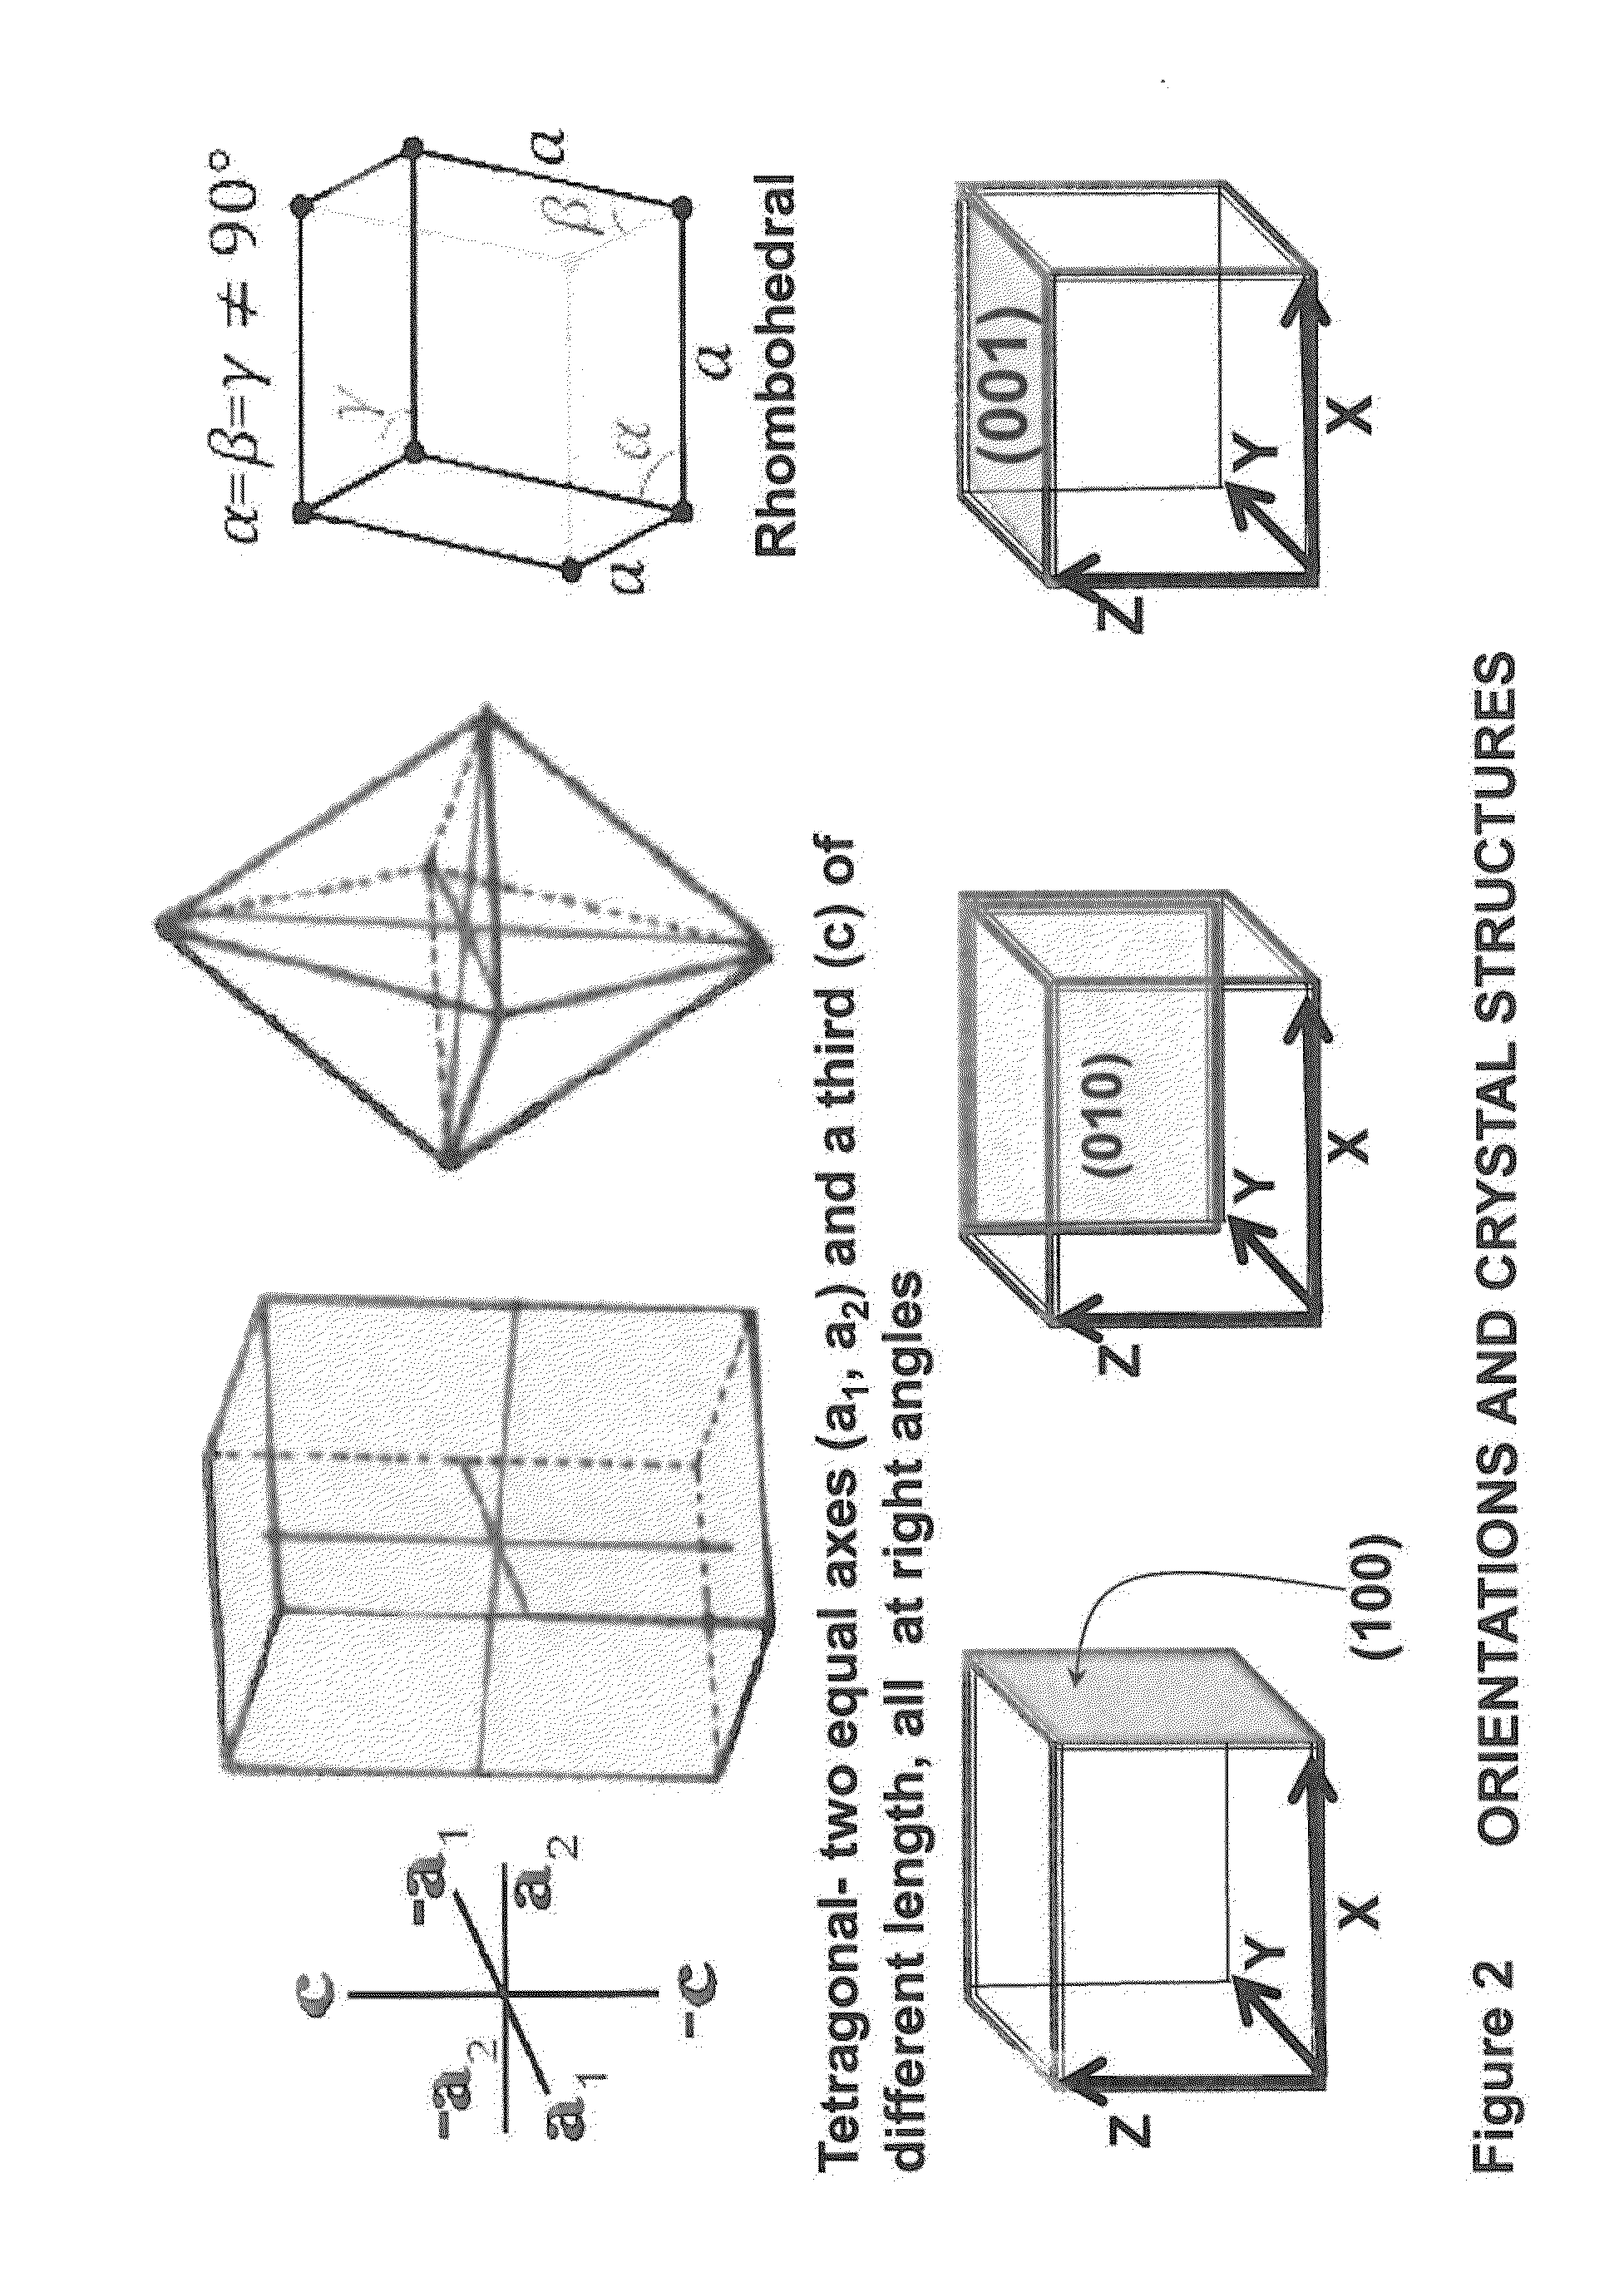 Stylo-Epitaxial Piezoelectric and Ferroelectric Devices and Method of Manufacturing